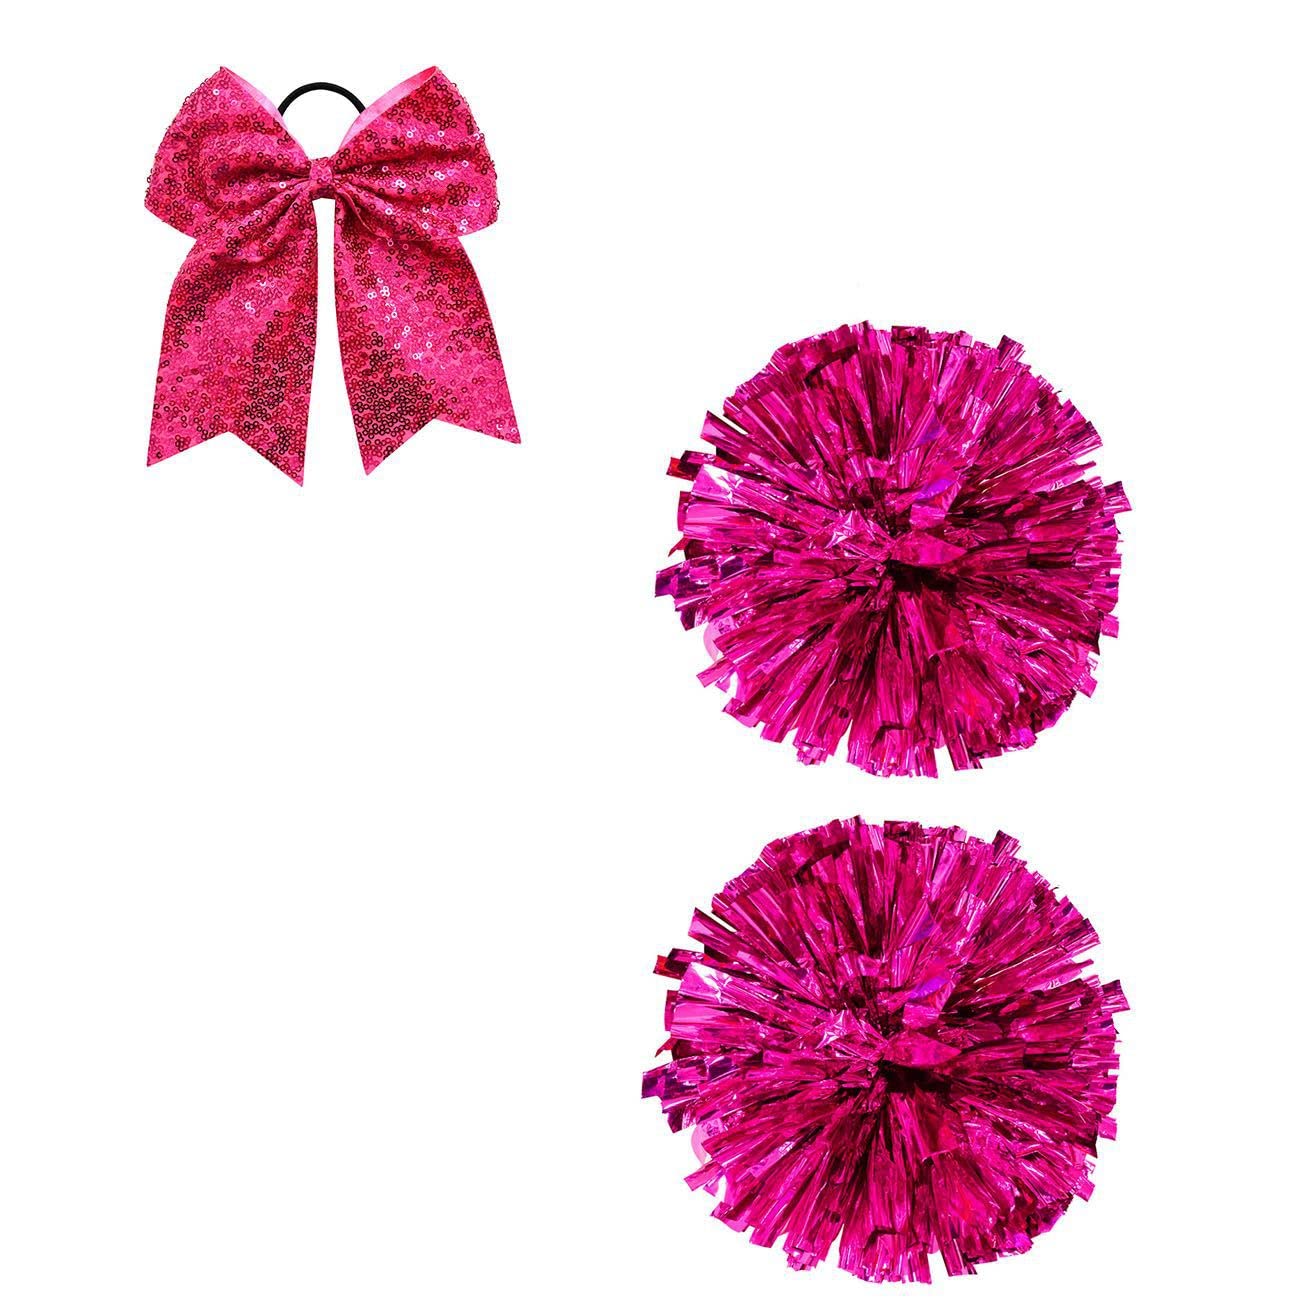 laughZuaia Kids Cheerleader Outfit Girls Pink Dresses With Poms Poms Children Carnival Party Halloween Fancy Dress Up Costume 4-10 Years(5-6 Years, Style 2)